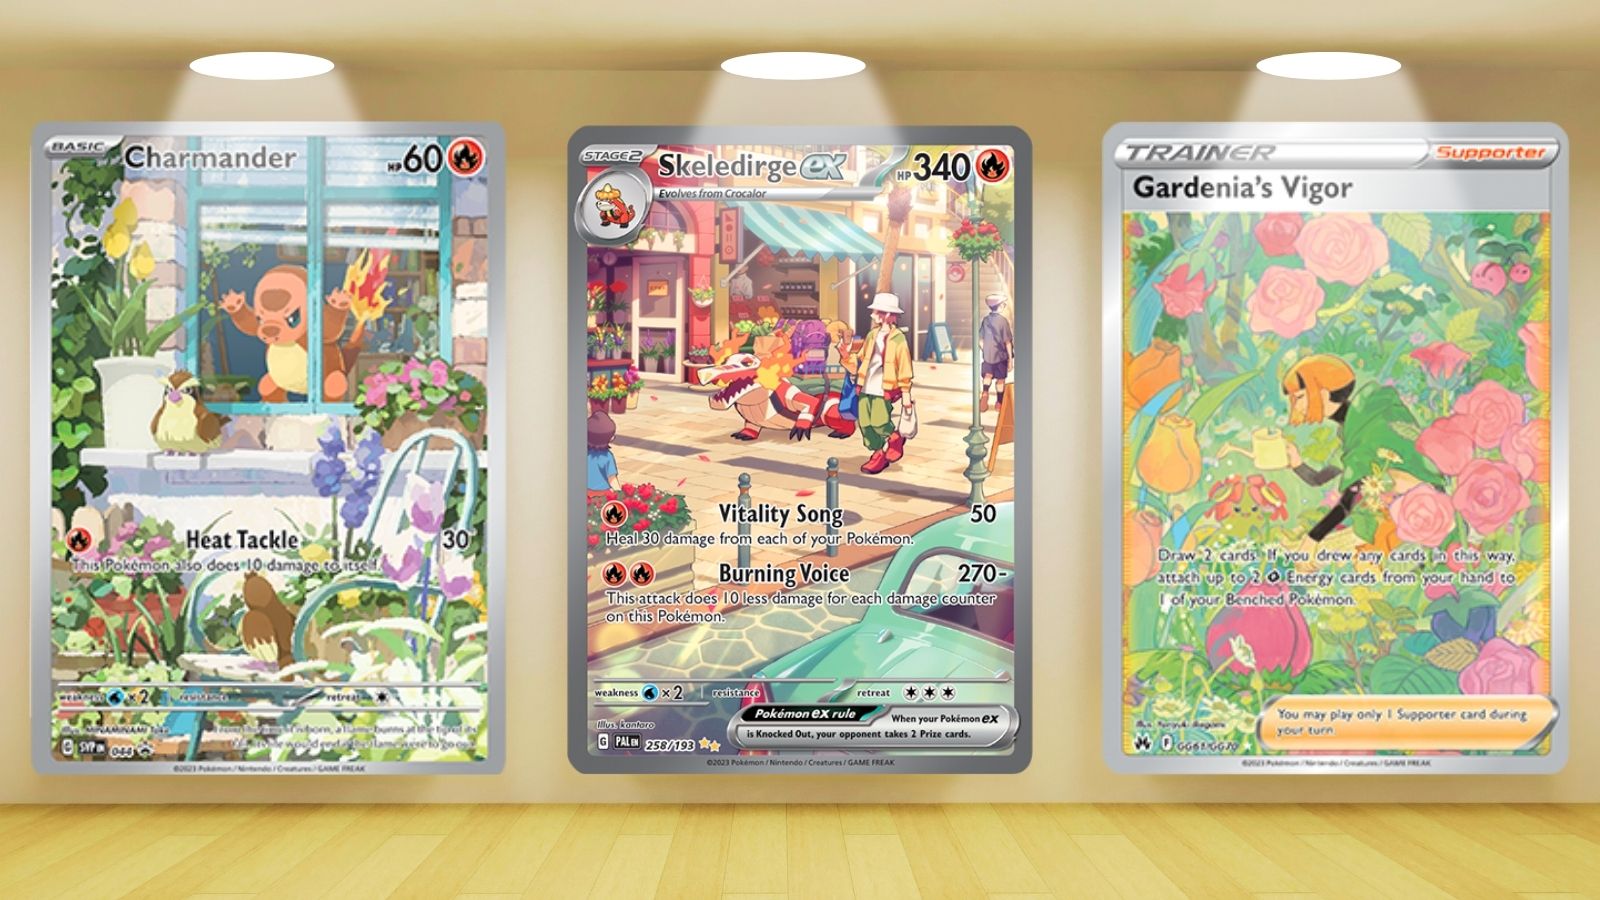 Pokemon TCG fans praise “amazing luck” of first pull in 20+ years